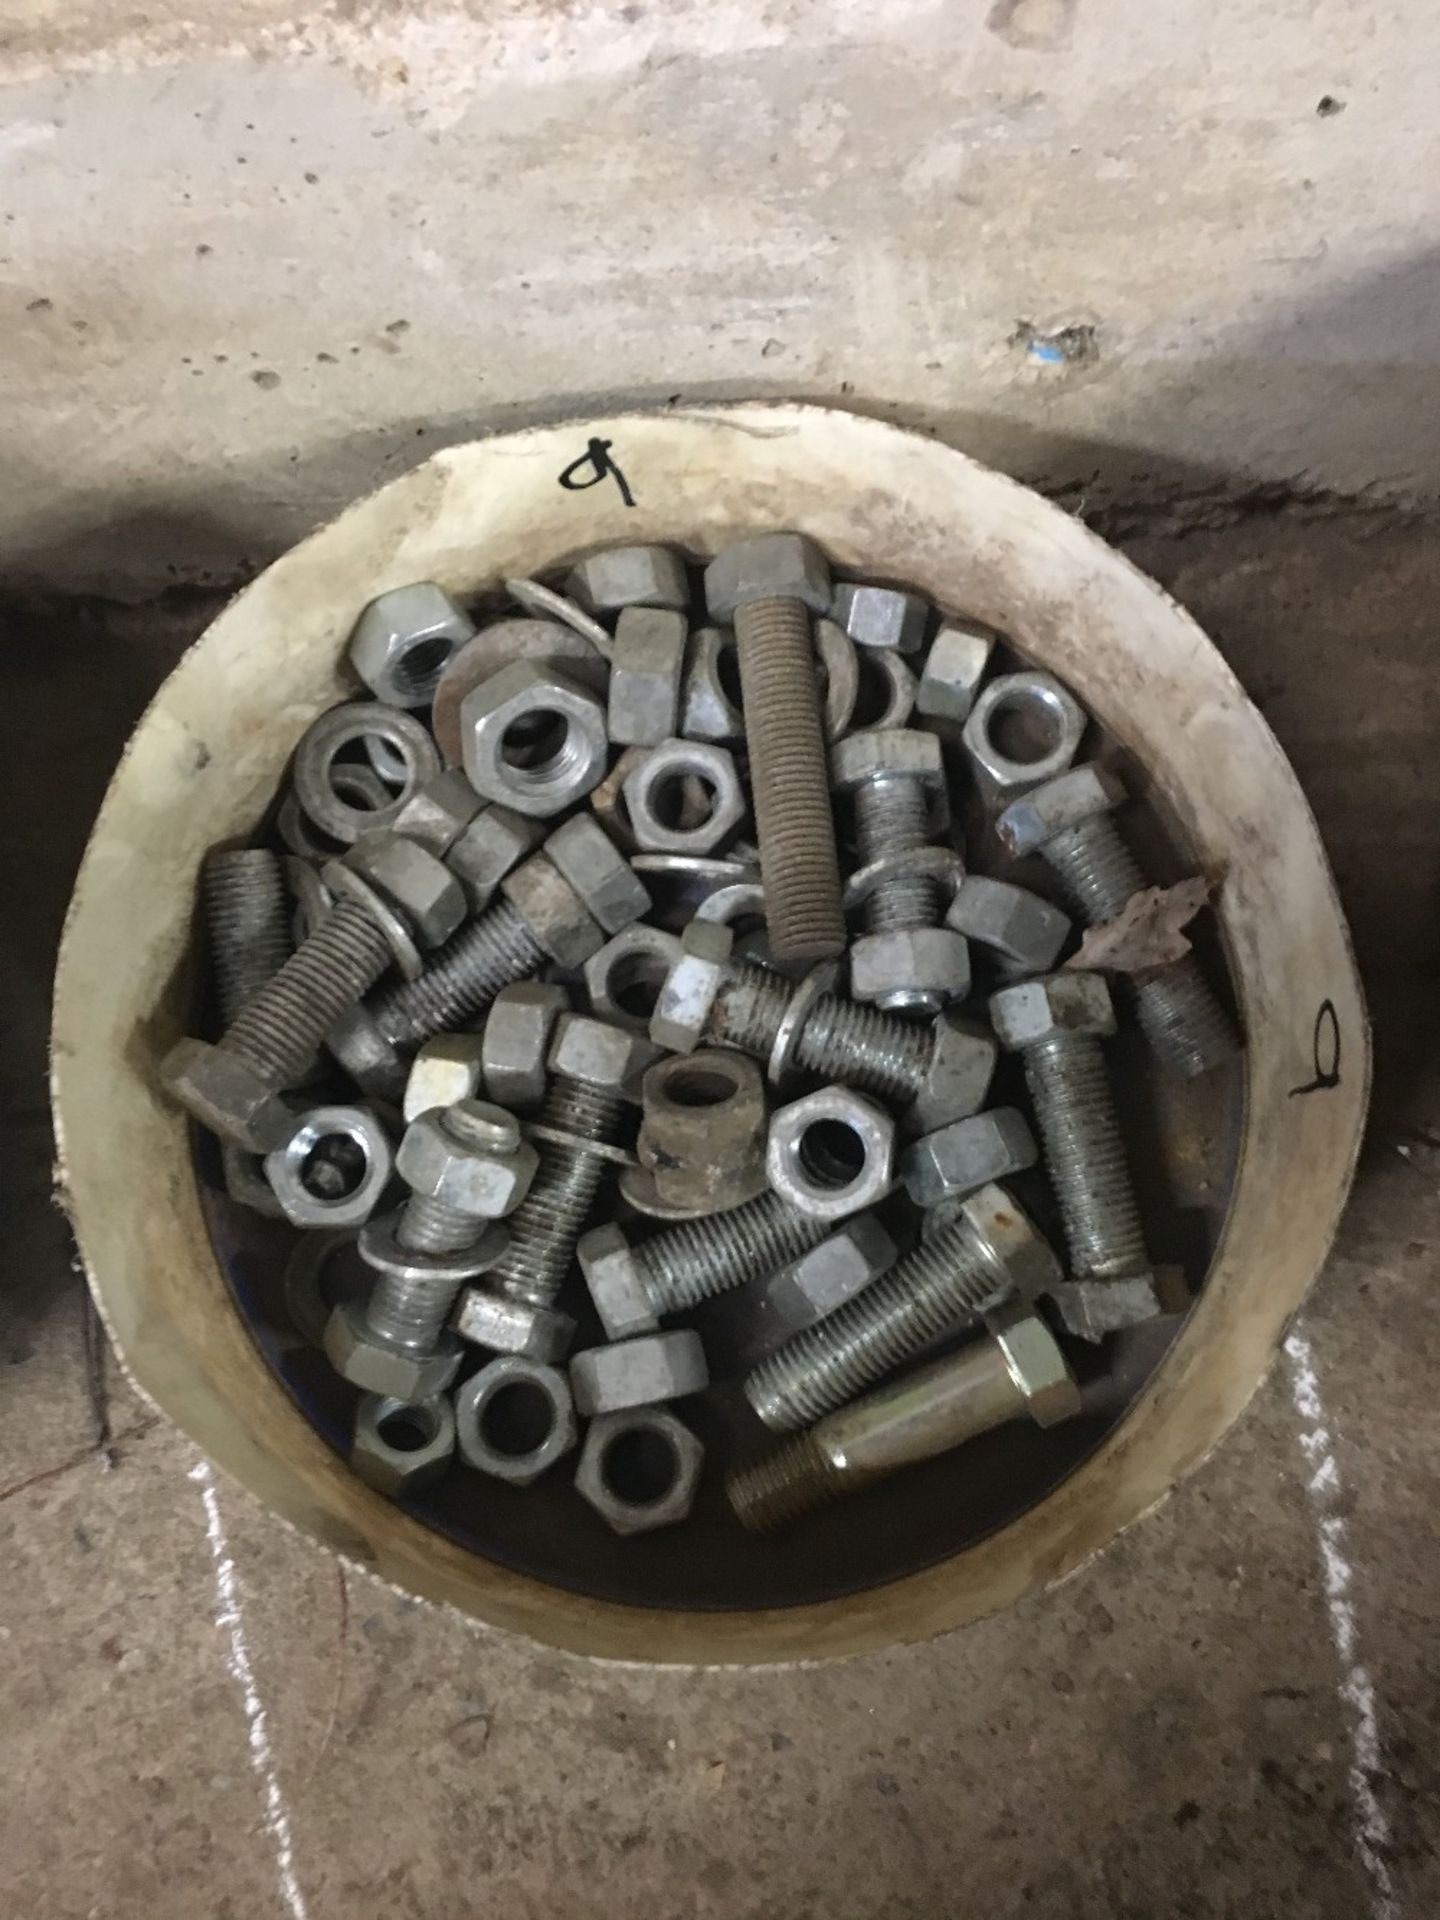 Bucket of Nuts and Bolts